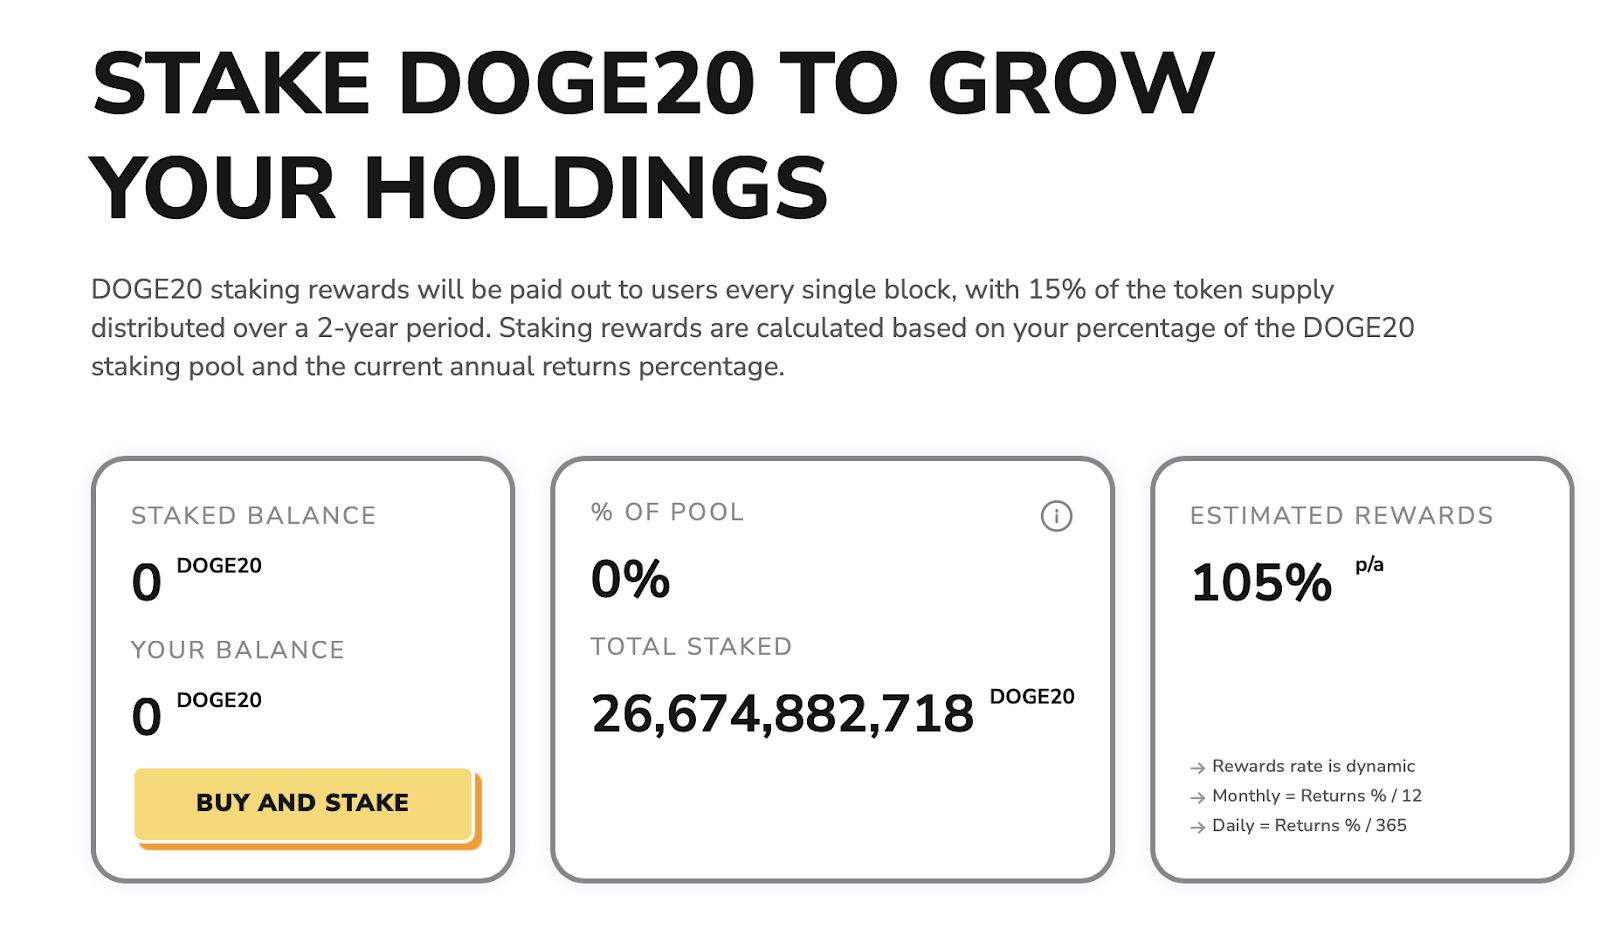 DOGE20 Staking 